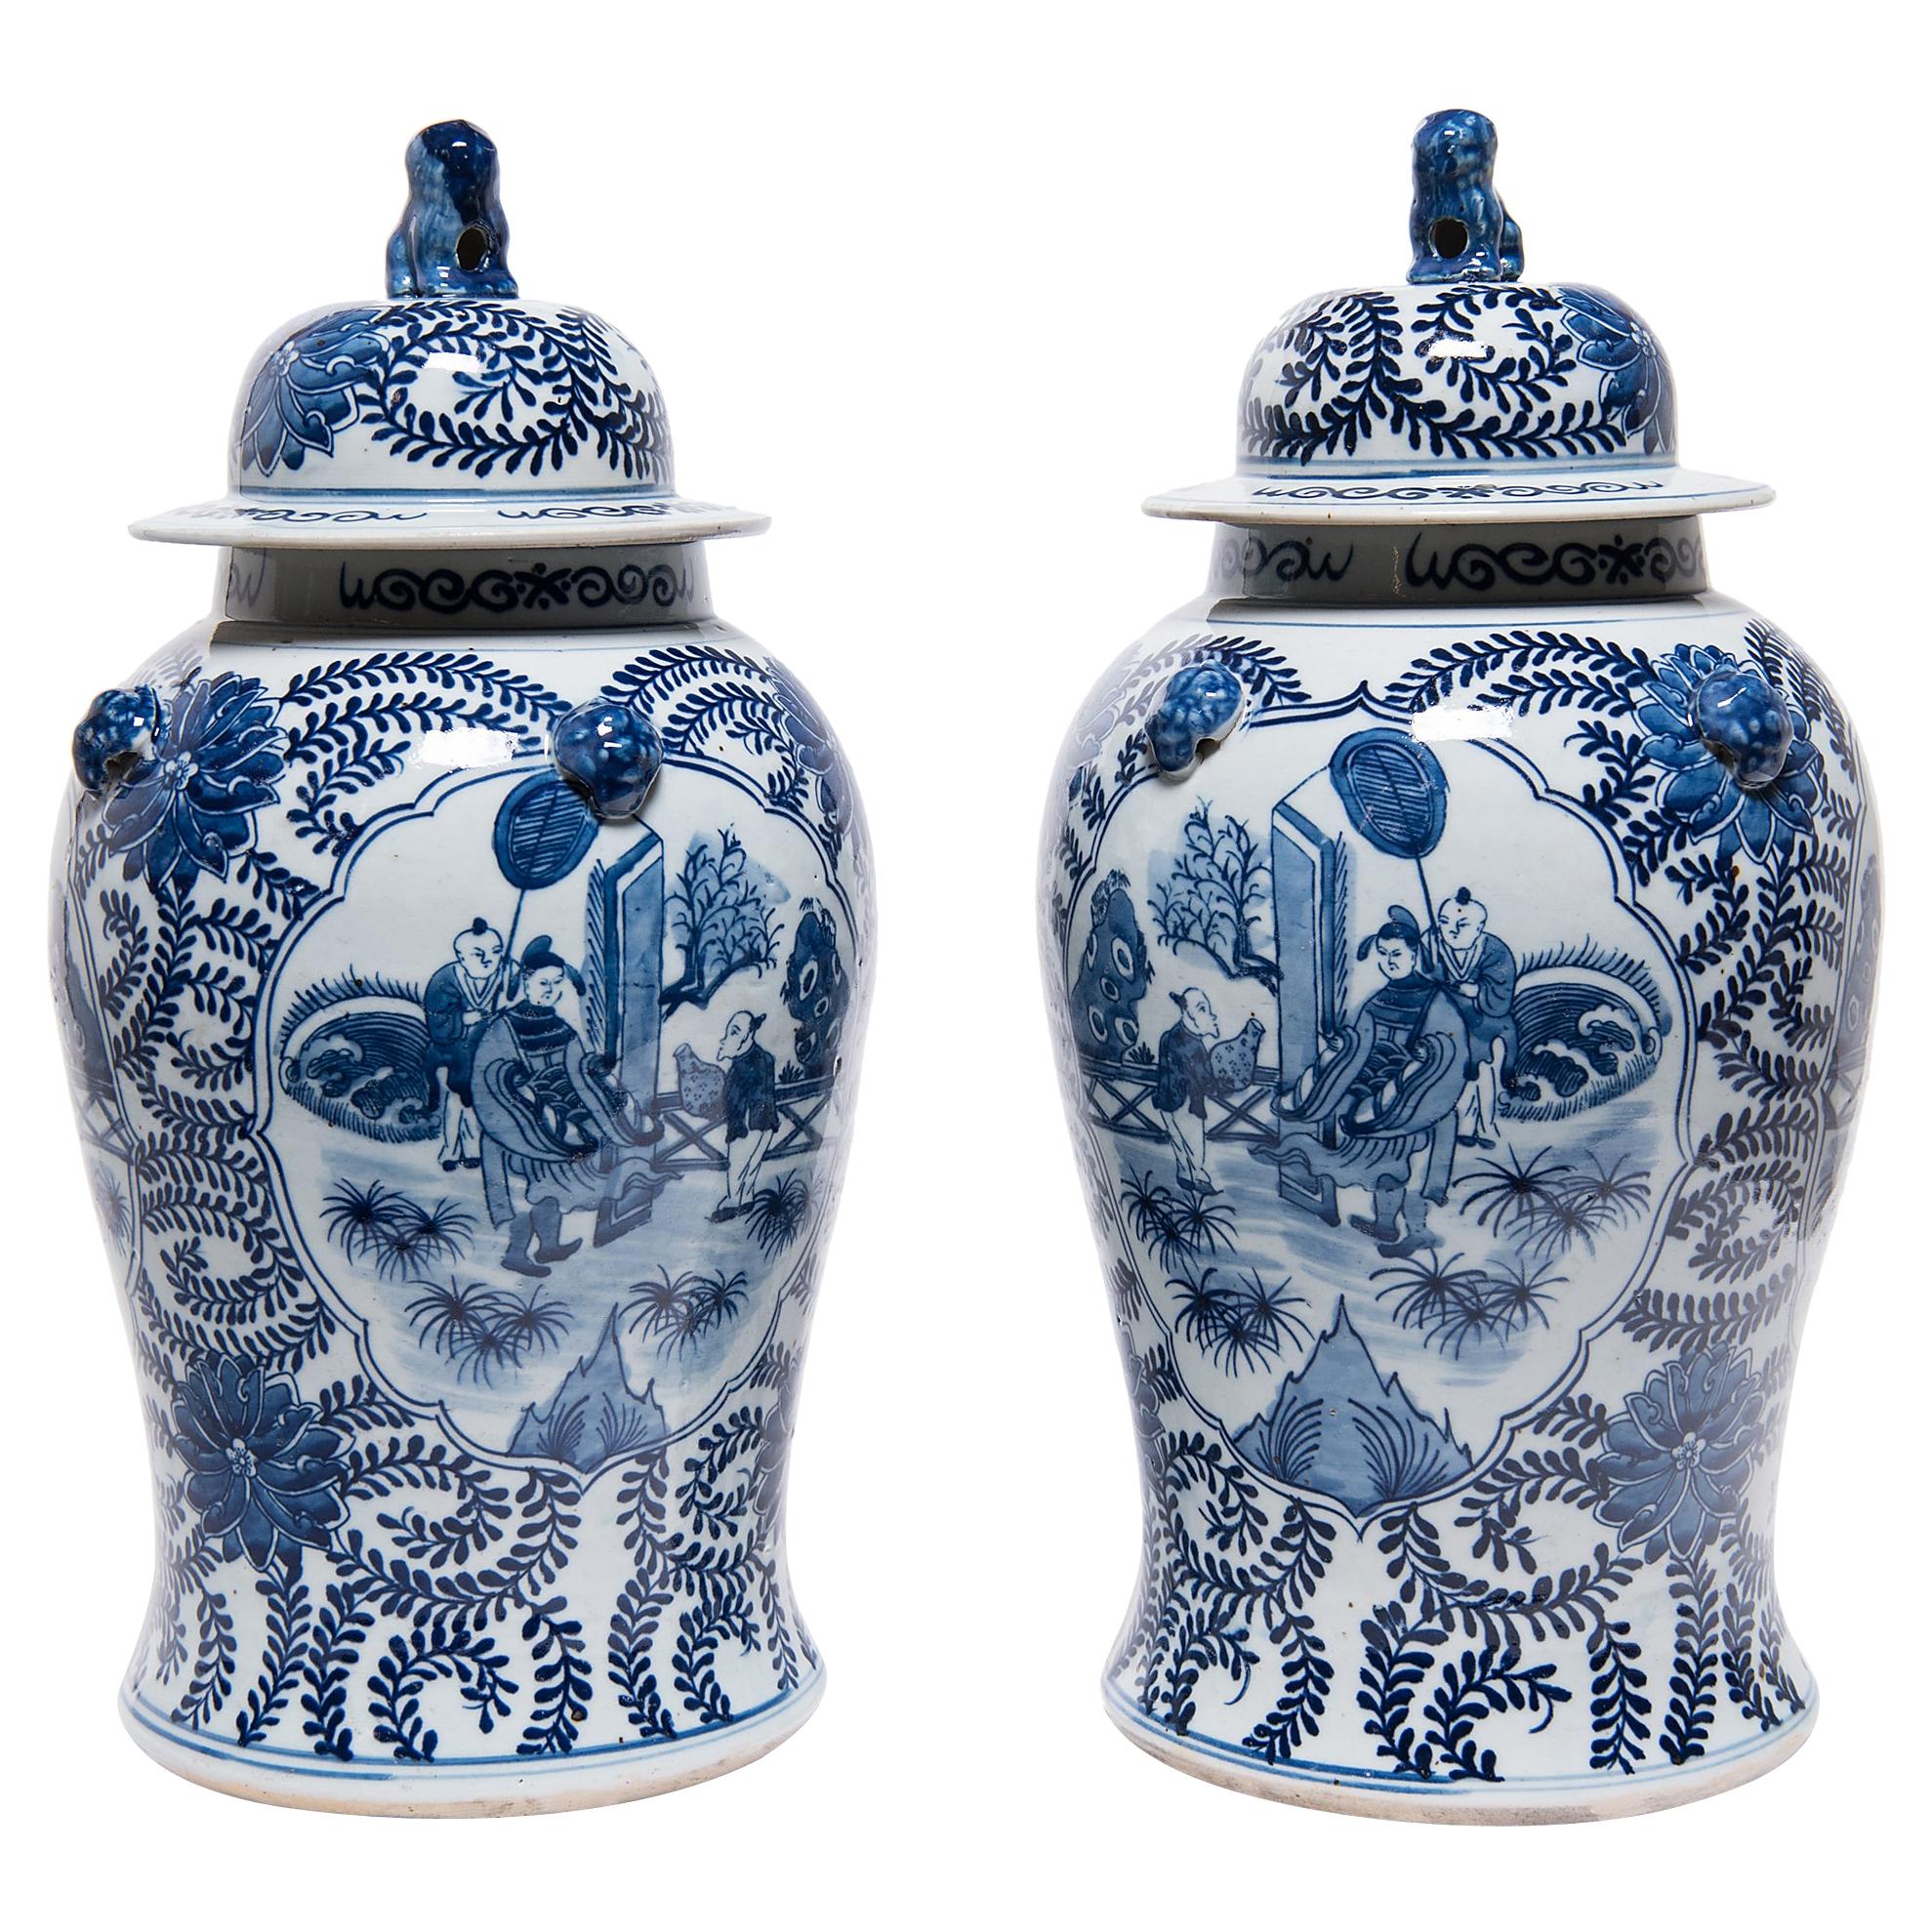 Pair of Chinese Blue and White Garden Baluster Jars